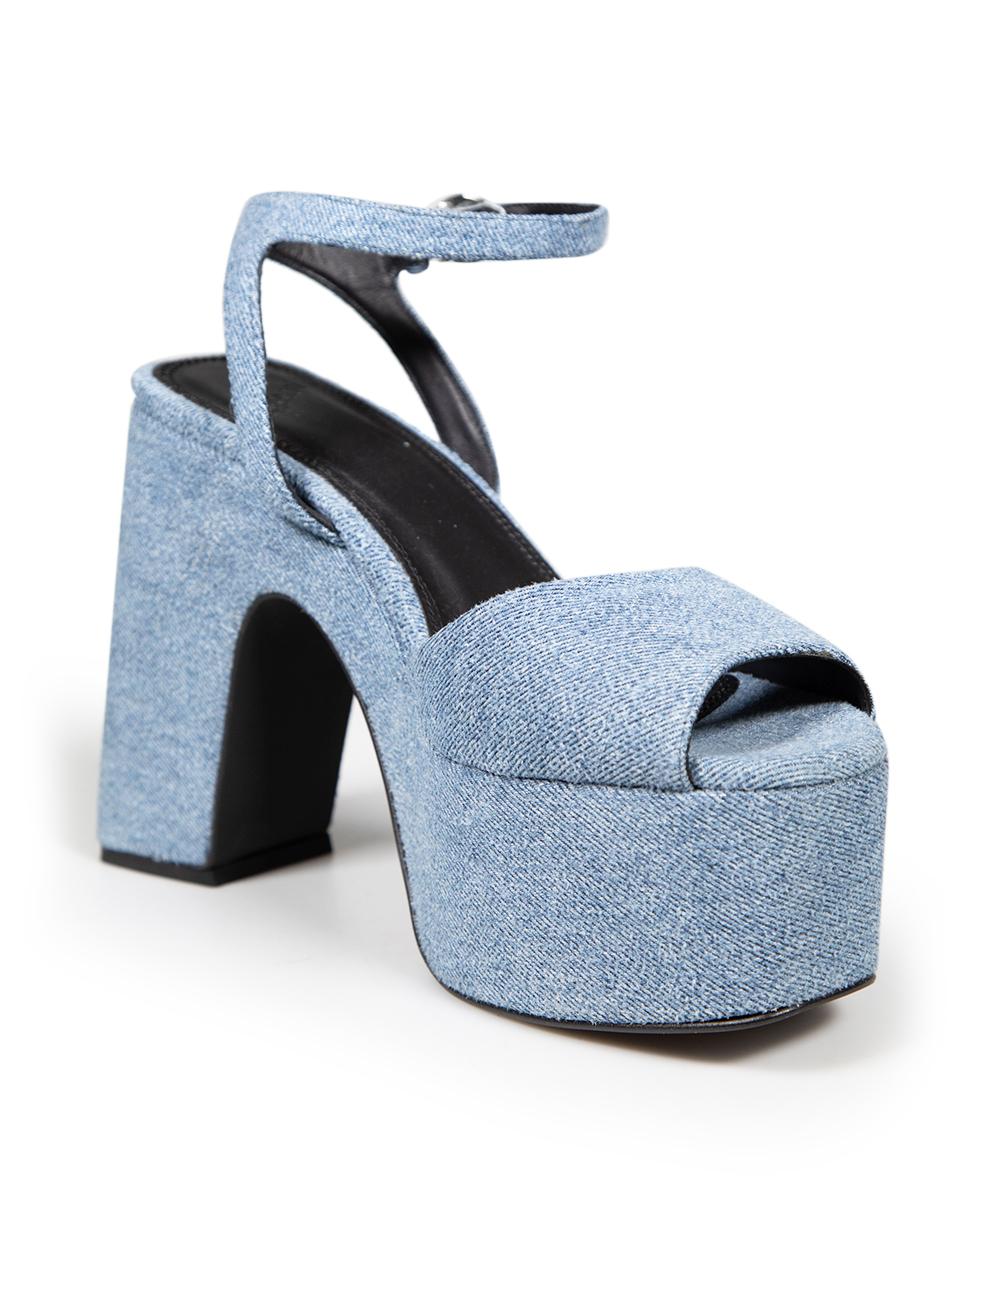 CONDITION is Very good. Minimal wear to sandals is evident. Minimal discolouration to both straps. Small pilling to the back, sides and heels of both shoes on this used Coperni designer resale item.
 
 
 
 Details
 
 
 Blue
 
 Denim
 
 Sandals
 
